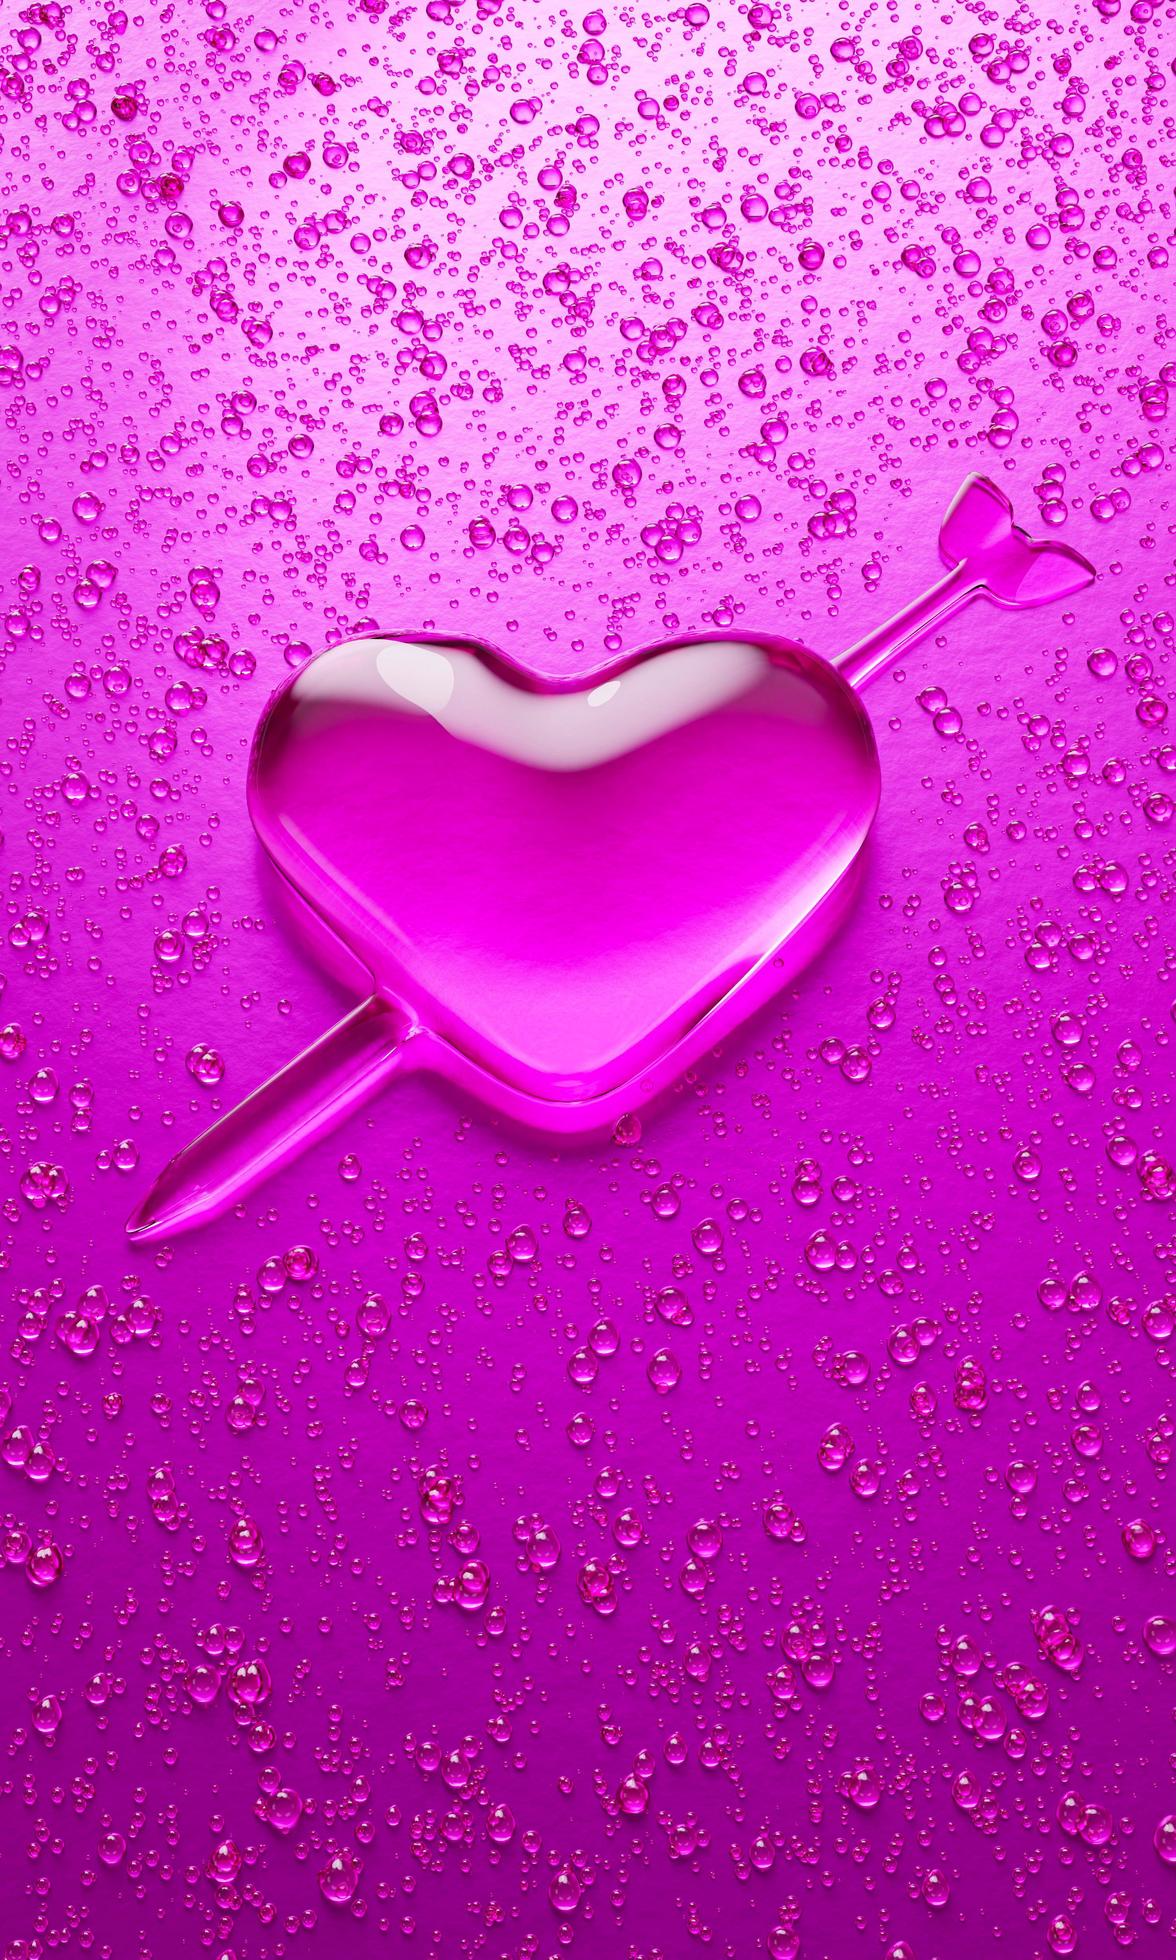 Water droplets in the shape of heart with Arrow embroidered in the meaning  of love. A lot of droplets On metallic surfaces in pink and dark pink  shades for mobile background or